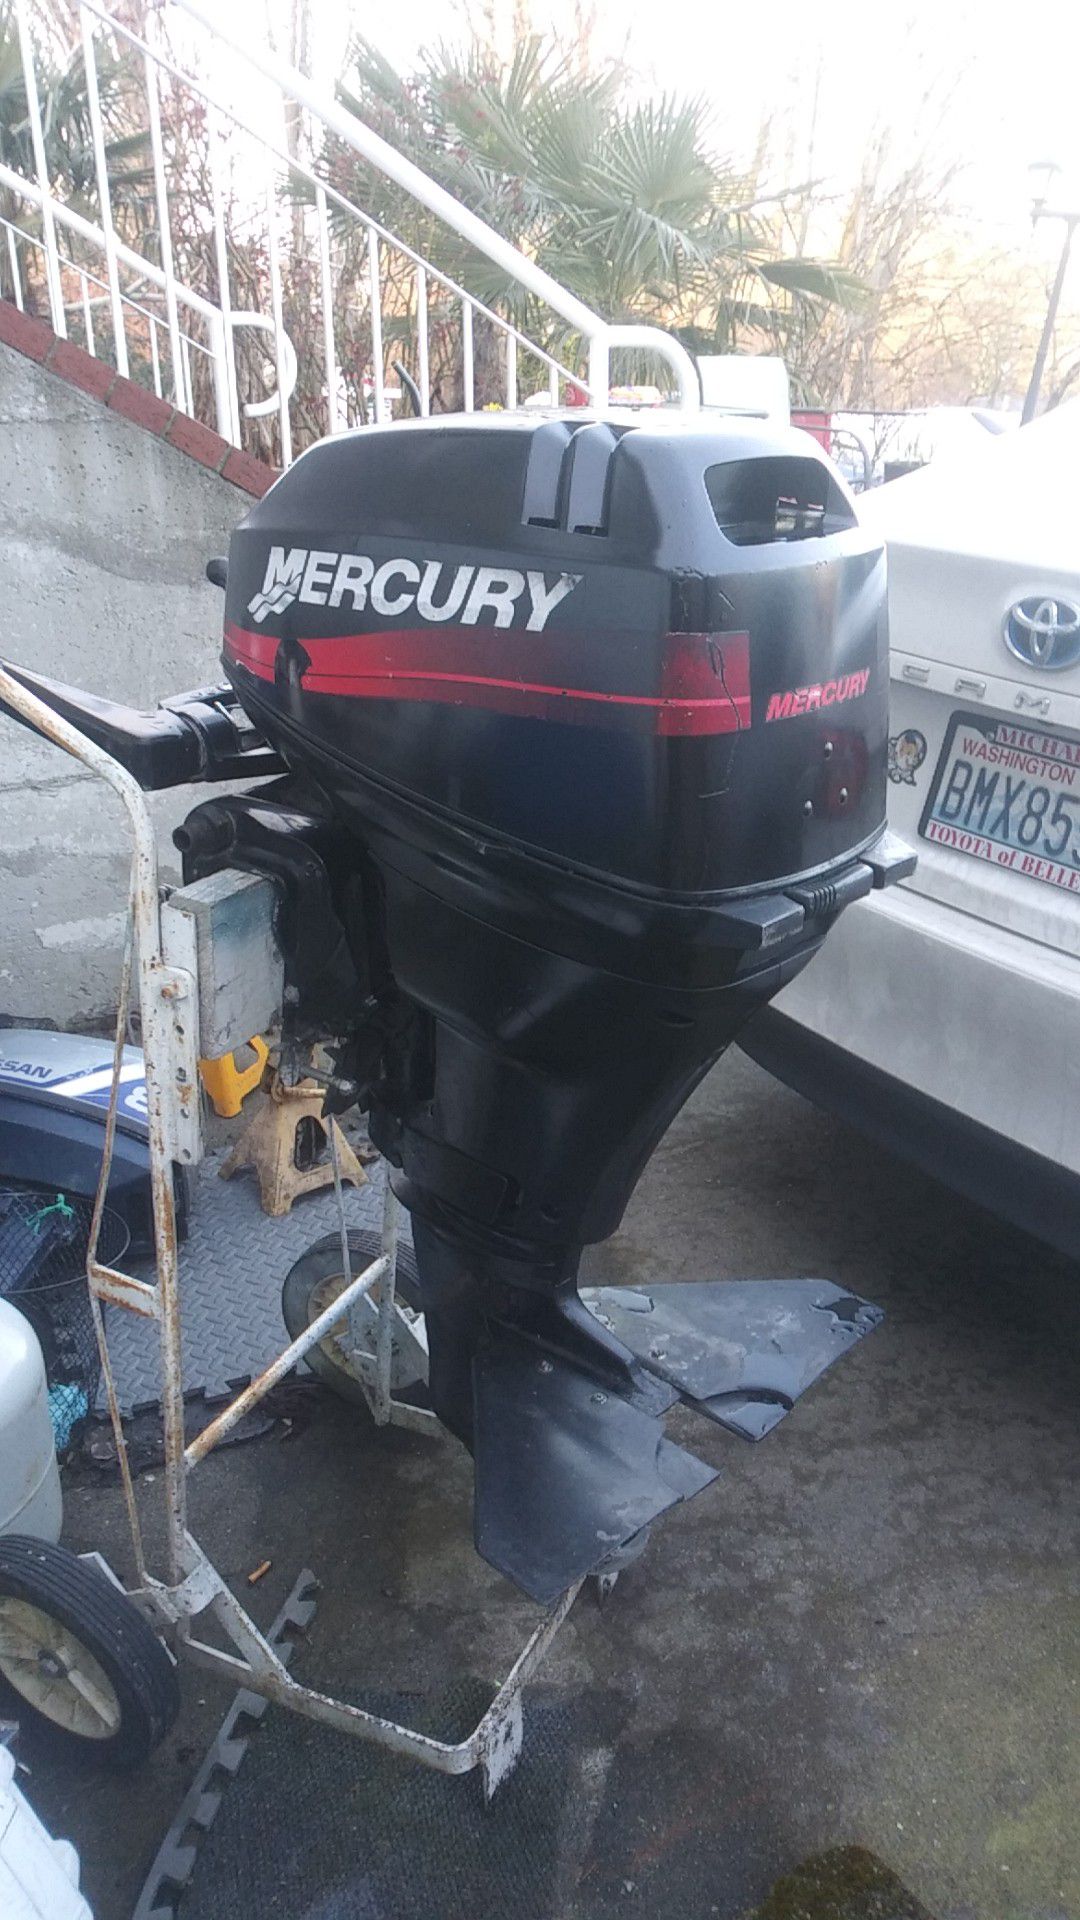 9.9 4 stroke big foot mercury Year 2000 $800 and 2005 mercury 4 stroke 15hp electric start and pull start $1000 and 20hp mercury $750 electric start